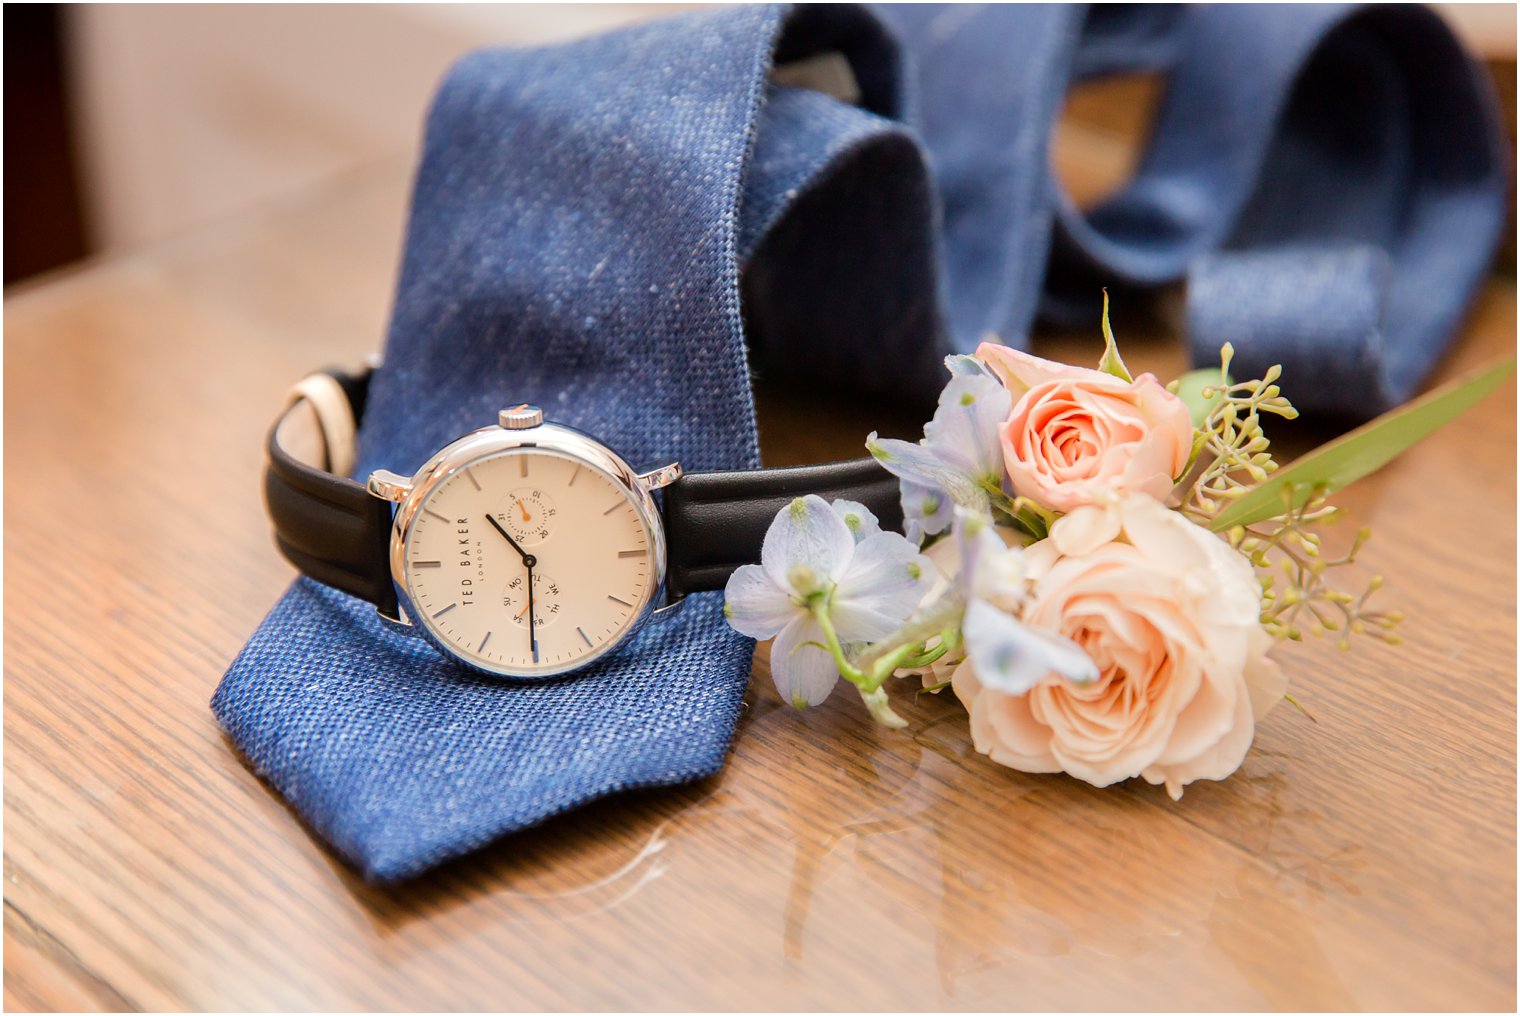 groom's watch on navy tie before LBI wedding day photographed by Idalia Photography